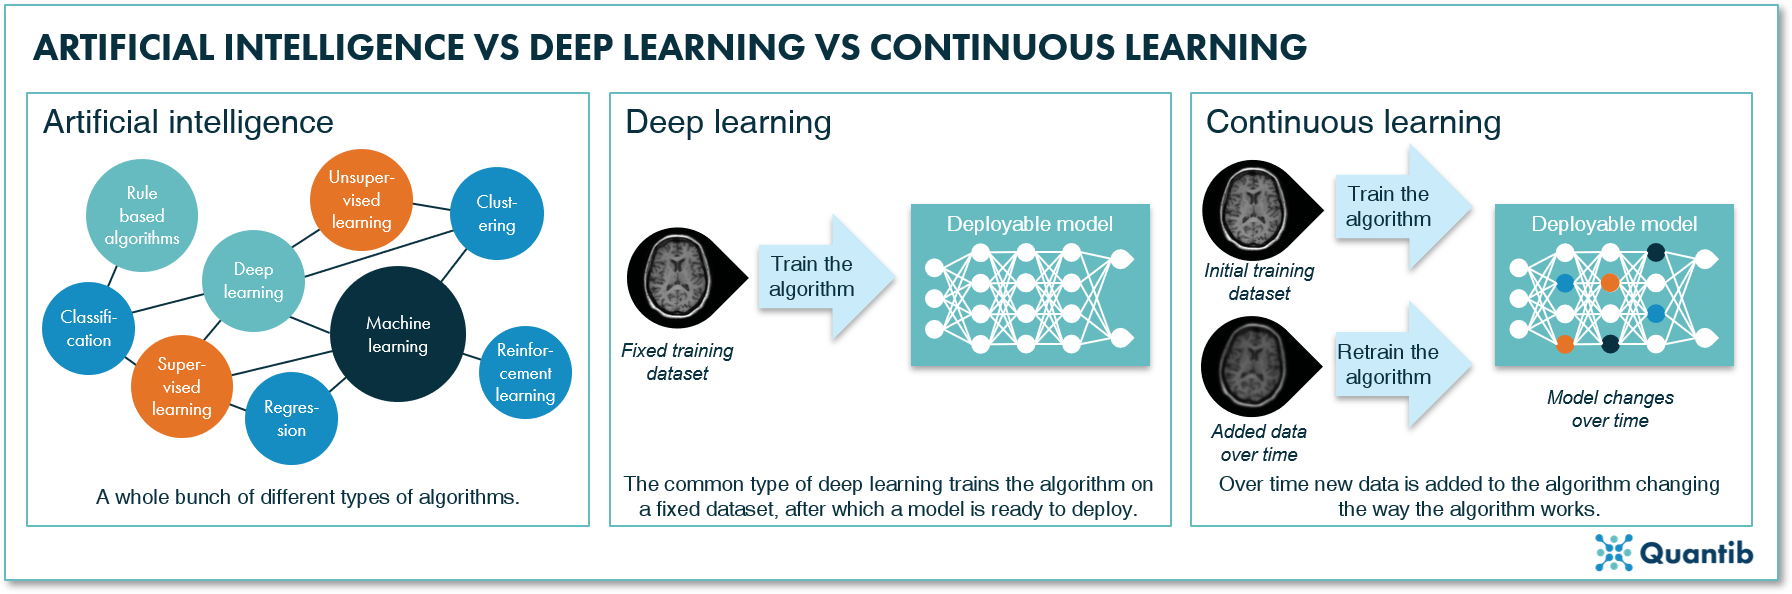 schematic figure explaining the difference between AI, deep learning and continuous learning in AI medical software context